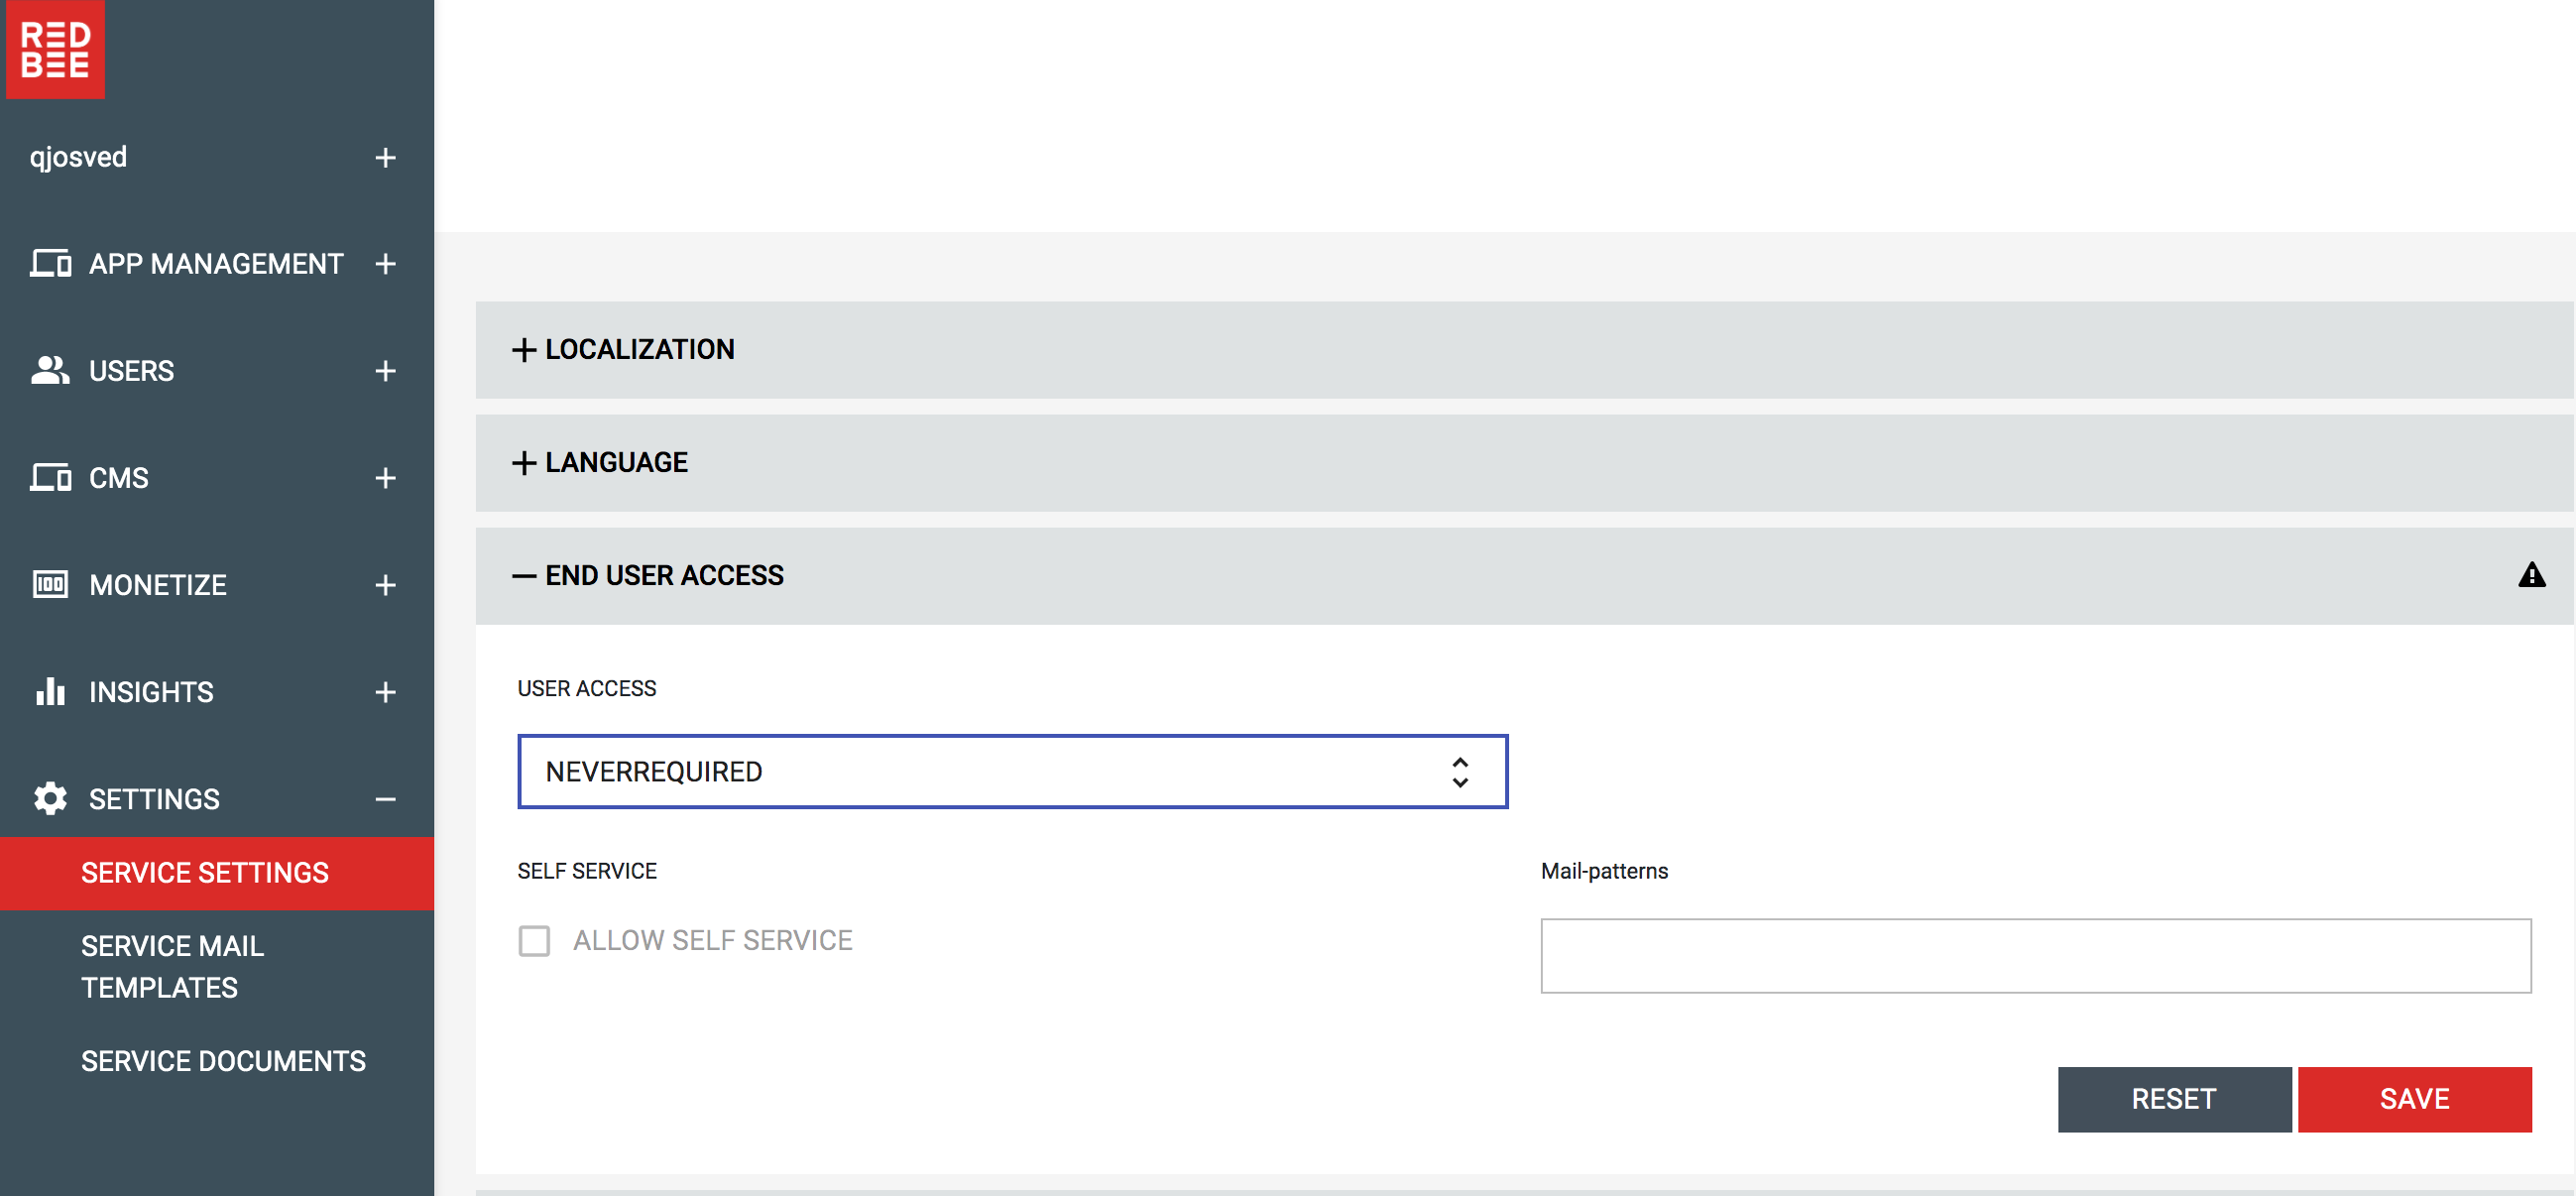 Customer Portal End User Access - Login Not Required